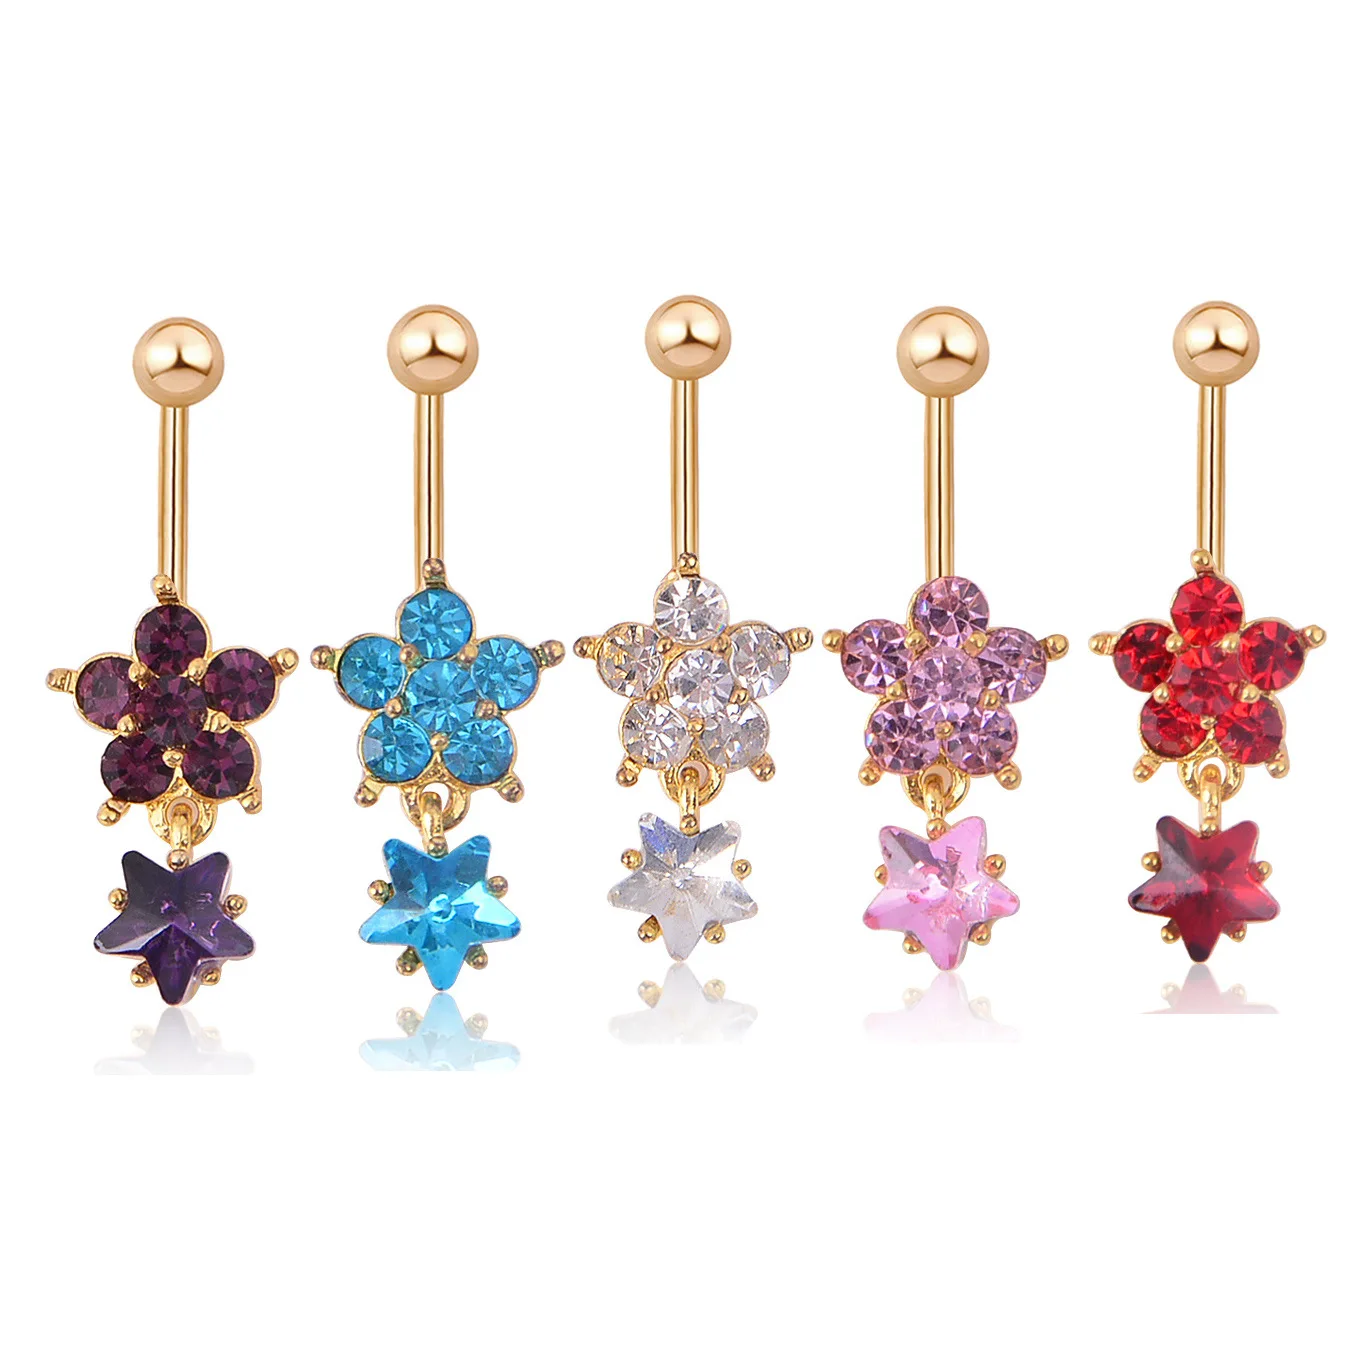 

VRIUA 1pc 5 Color Belly Button Ring Exquisite Fashion Diamond-studded Five-pointed Star Belly Button Piercing, Multicolor